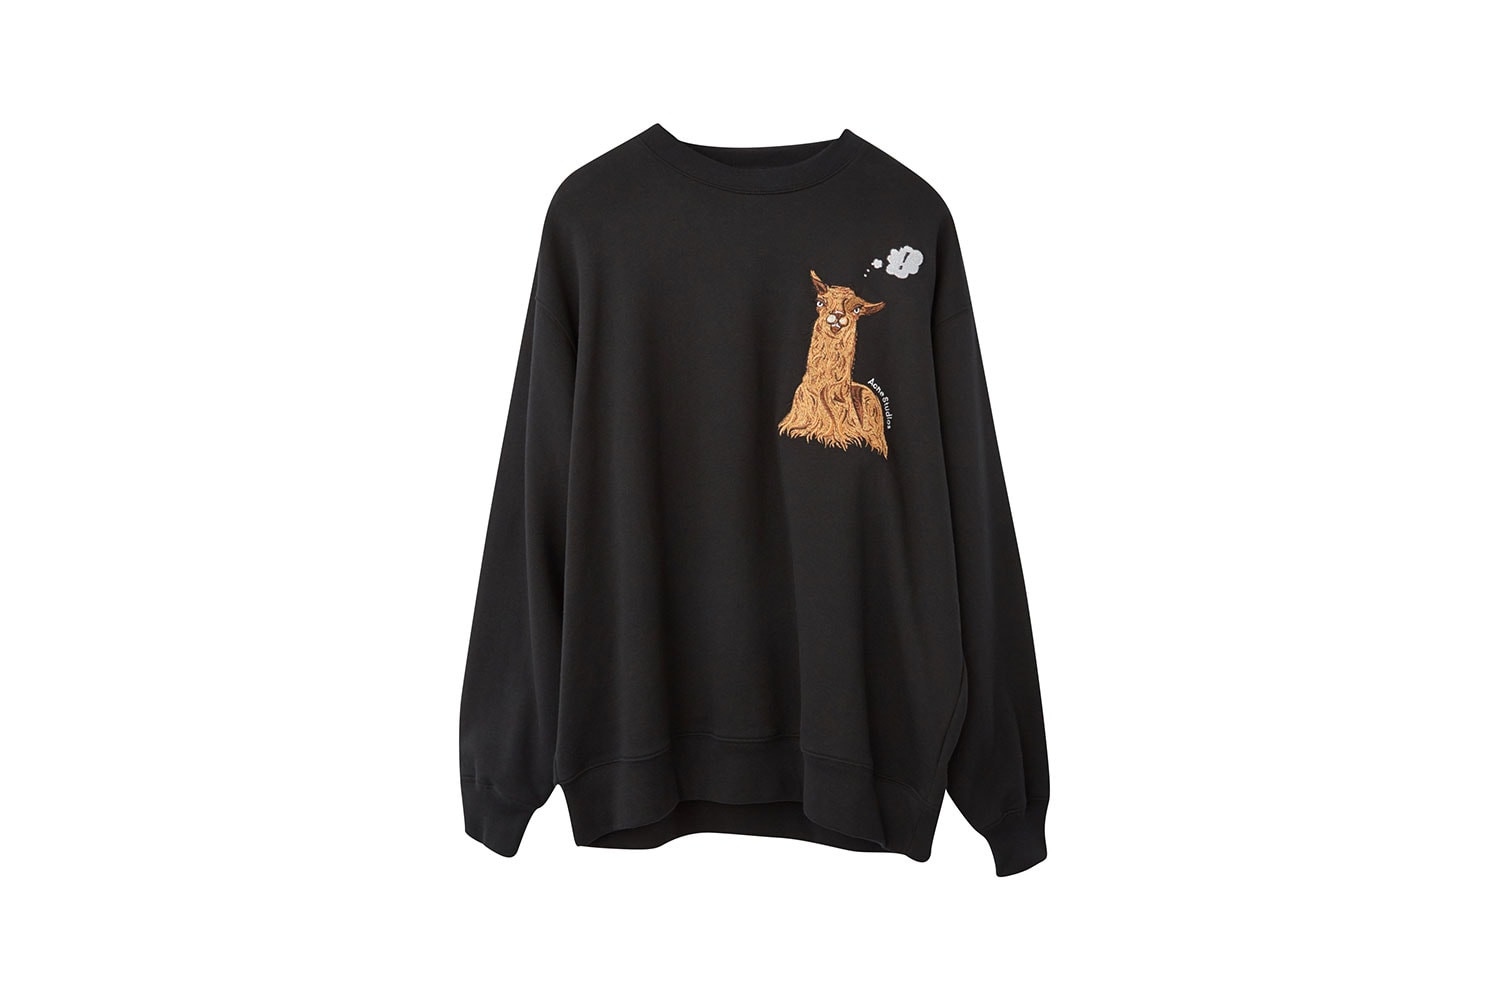 acne studios animal embroidery unisex collection fall winter sweatshirts hoodies scarves 